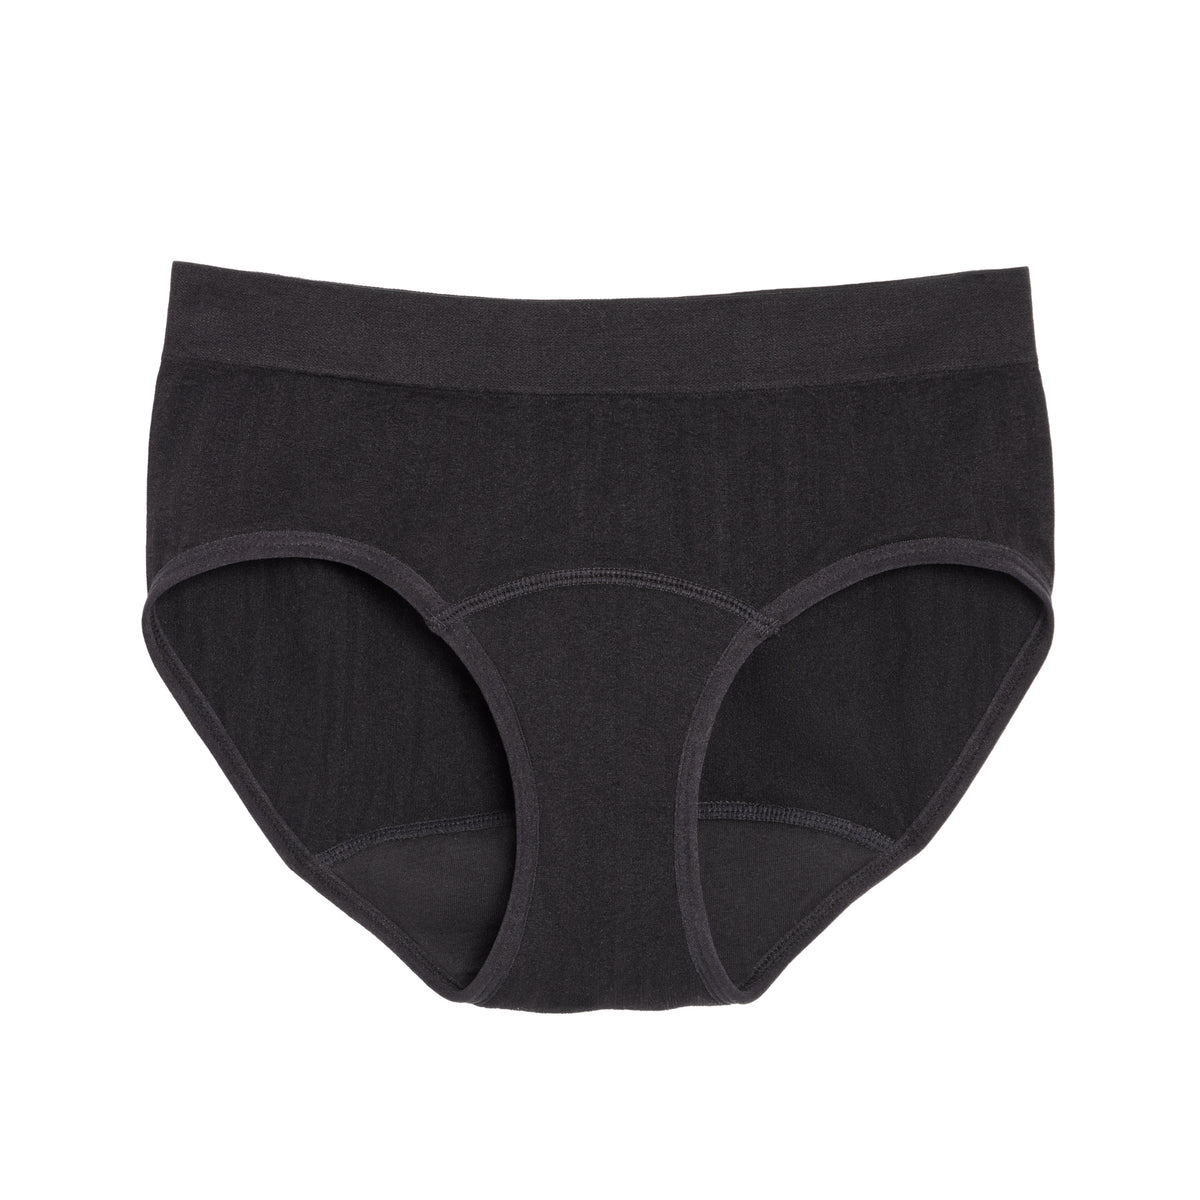  Sporty Stretch High Waisted Period Underwear, Organic Cotton  Gusset, Super-Absorbent for Heavy Flows